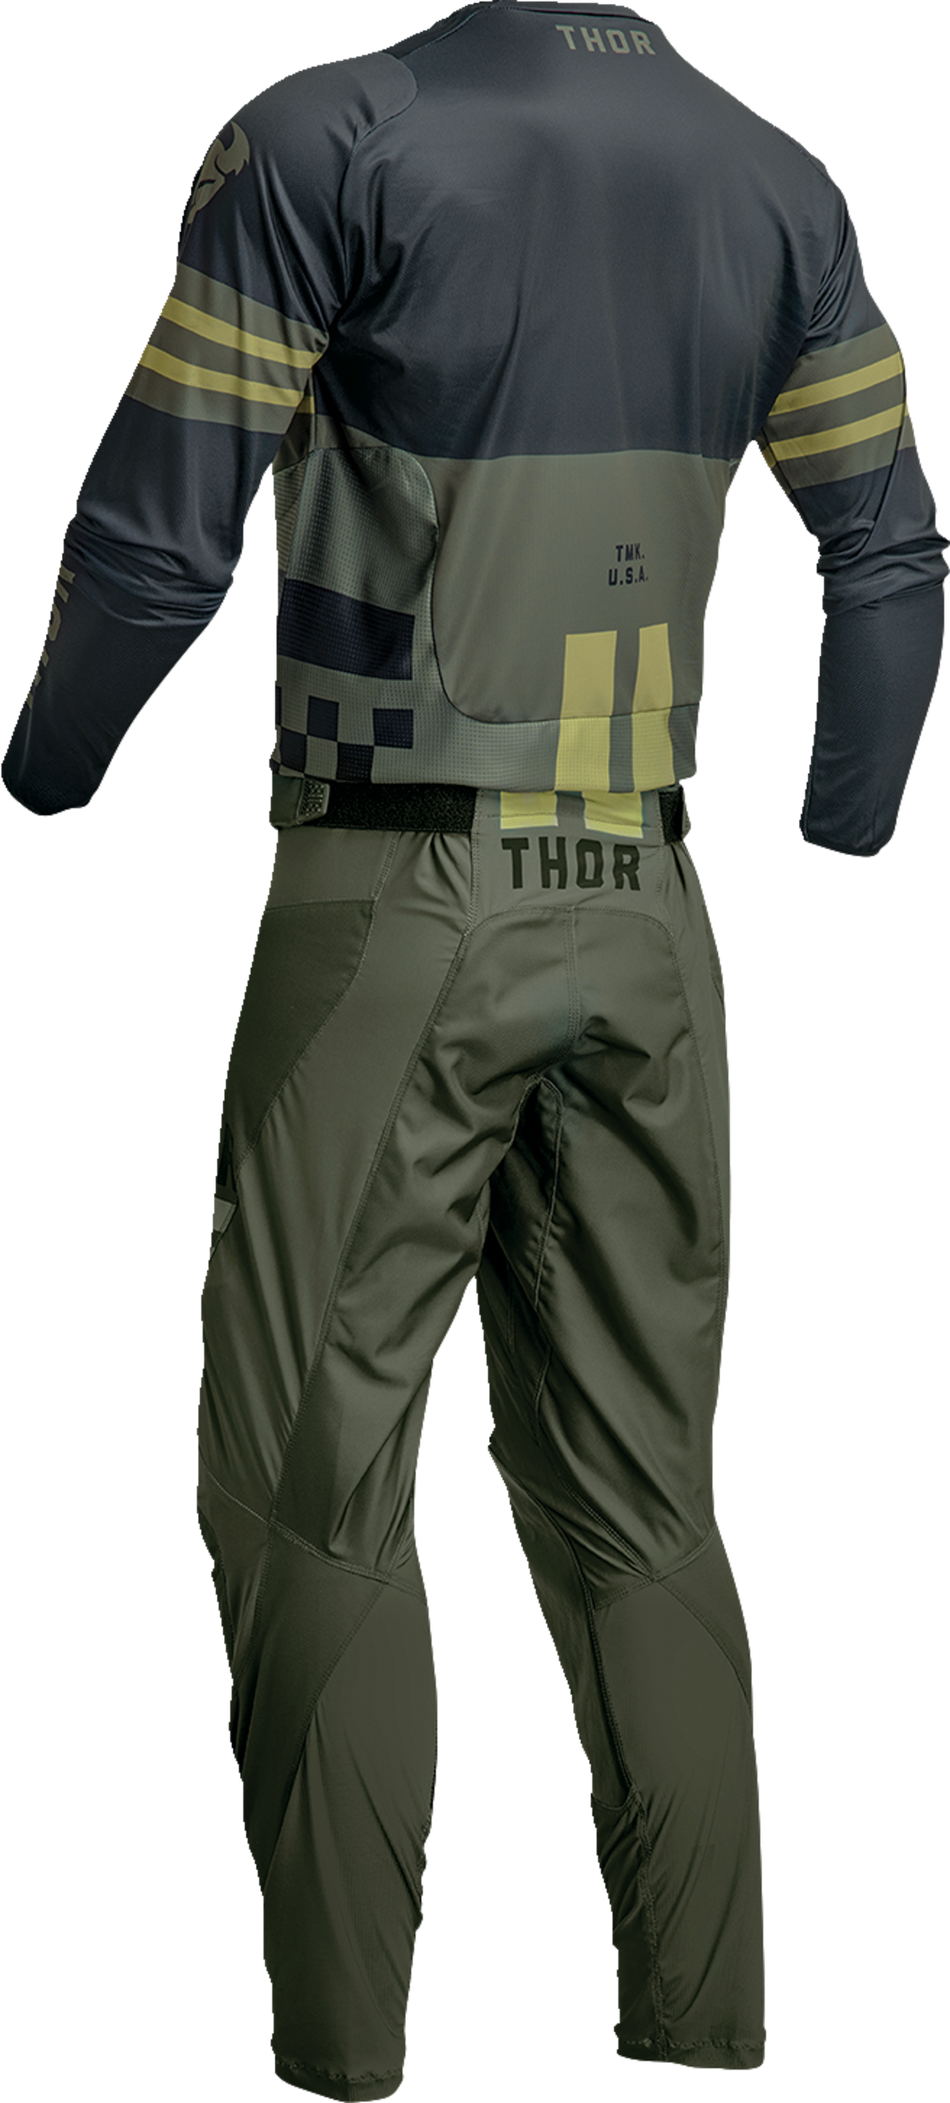 THOR Pulse Combat Jersey - Army - Small 2910-7085